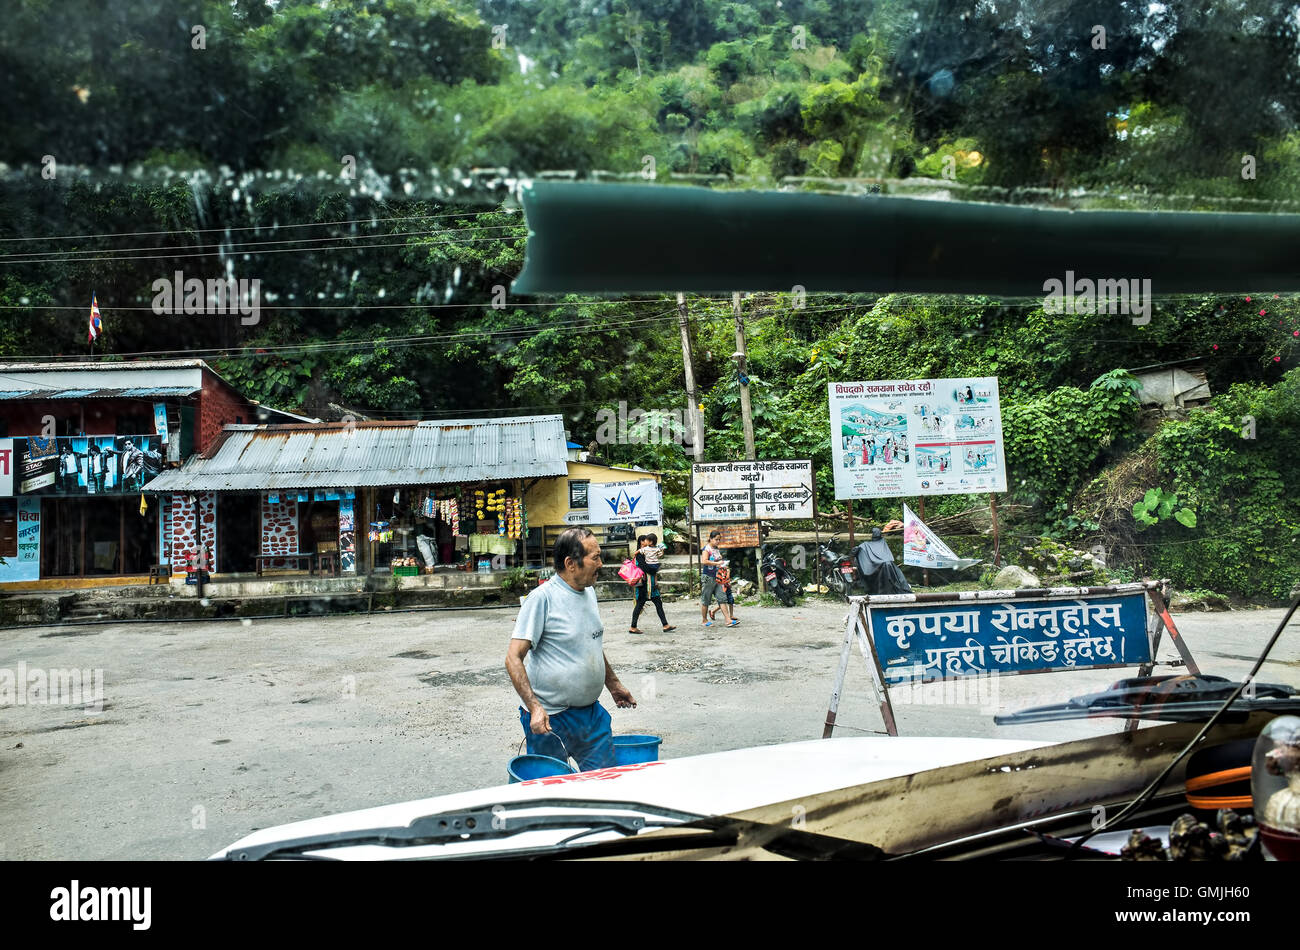 street view from front seat of a car on the way to Kathmandu, Nepal Stock Photo